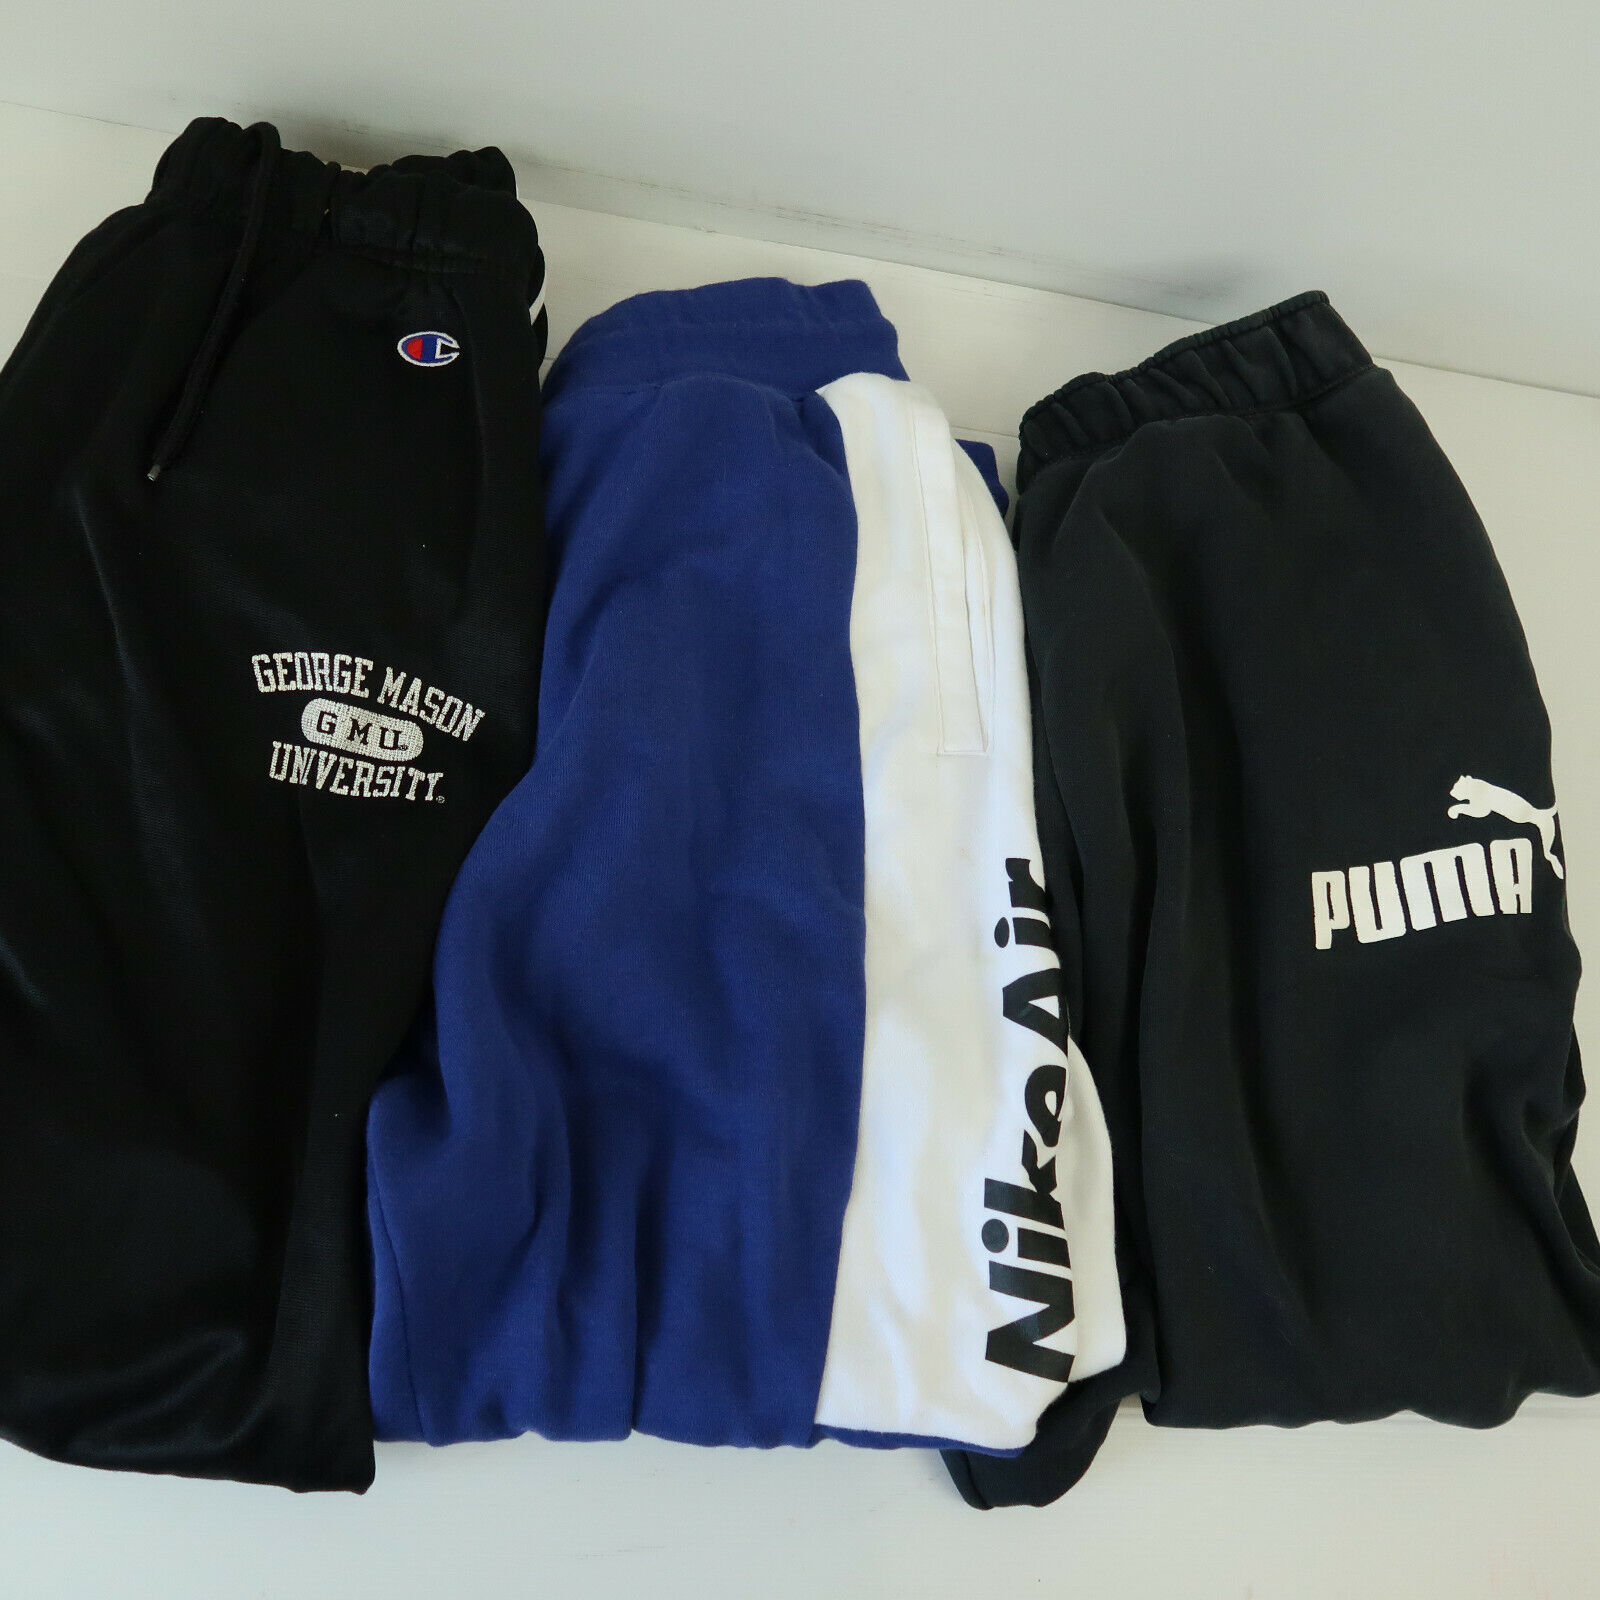 10x Track Pants Branded Nike Adidas Clothing Reseller Wholesale Bulk Lot Bundle Assorted Does Not Apply - фотография #2